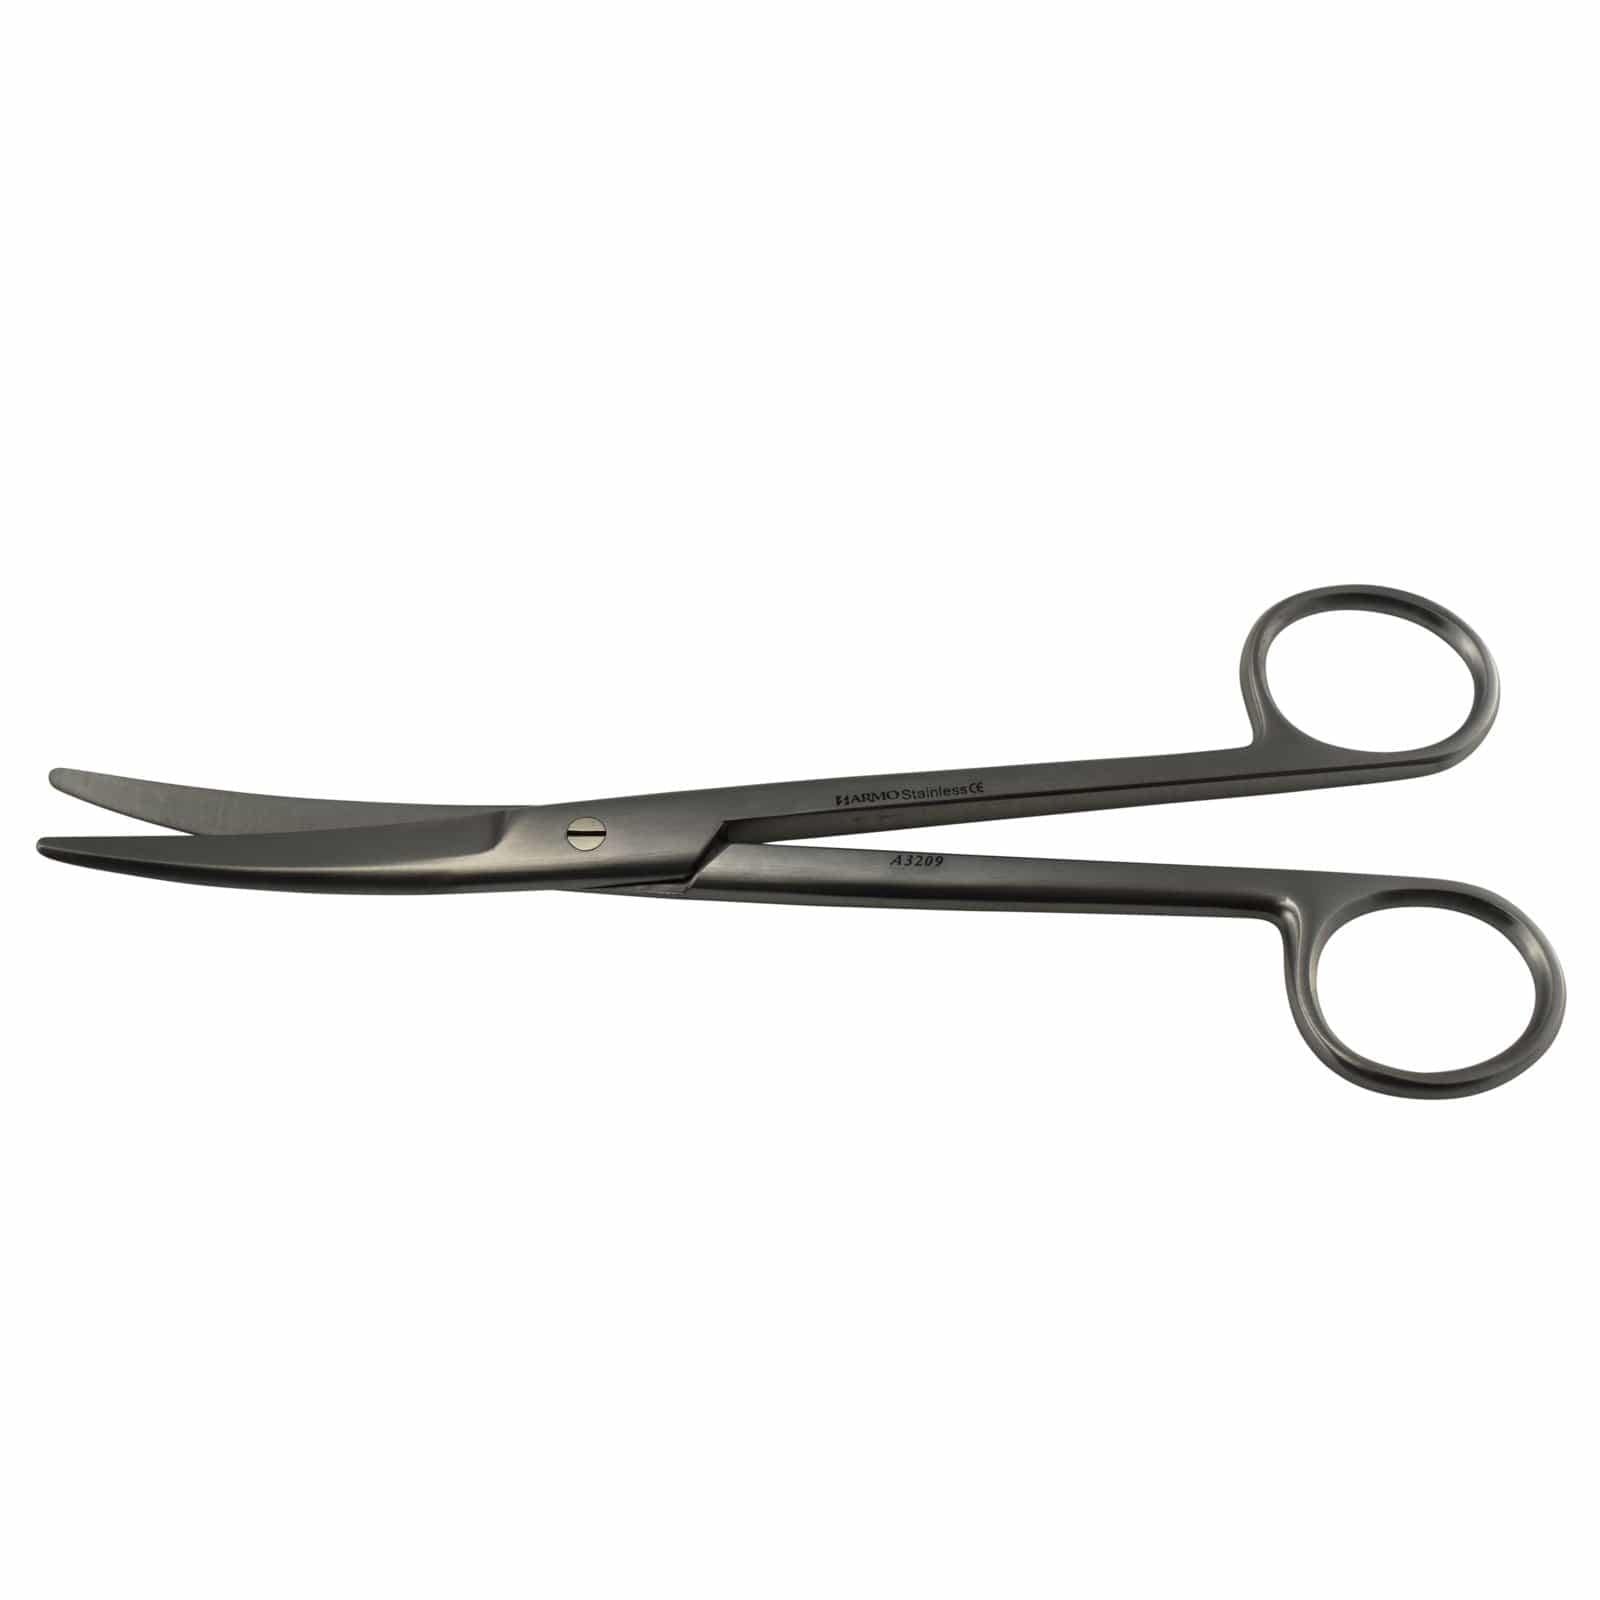 Armo Surgical Instruments 17cm / Curved / Standard Armo Mayo Scissors